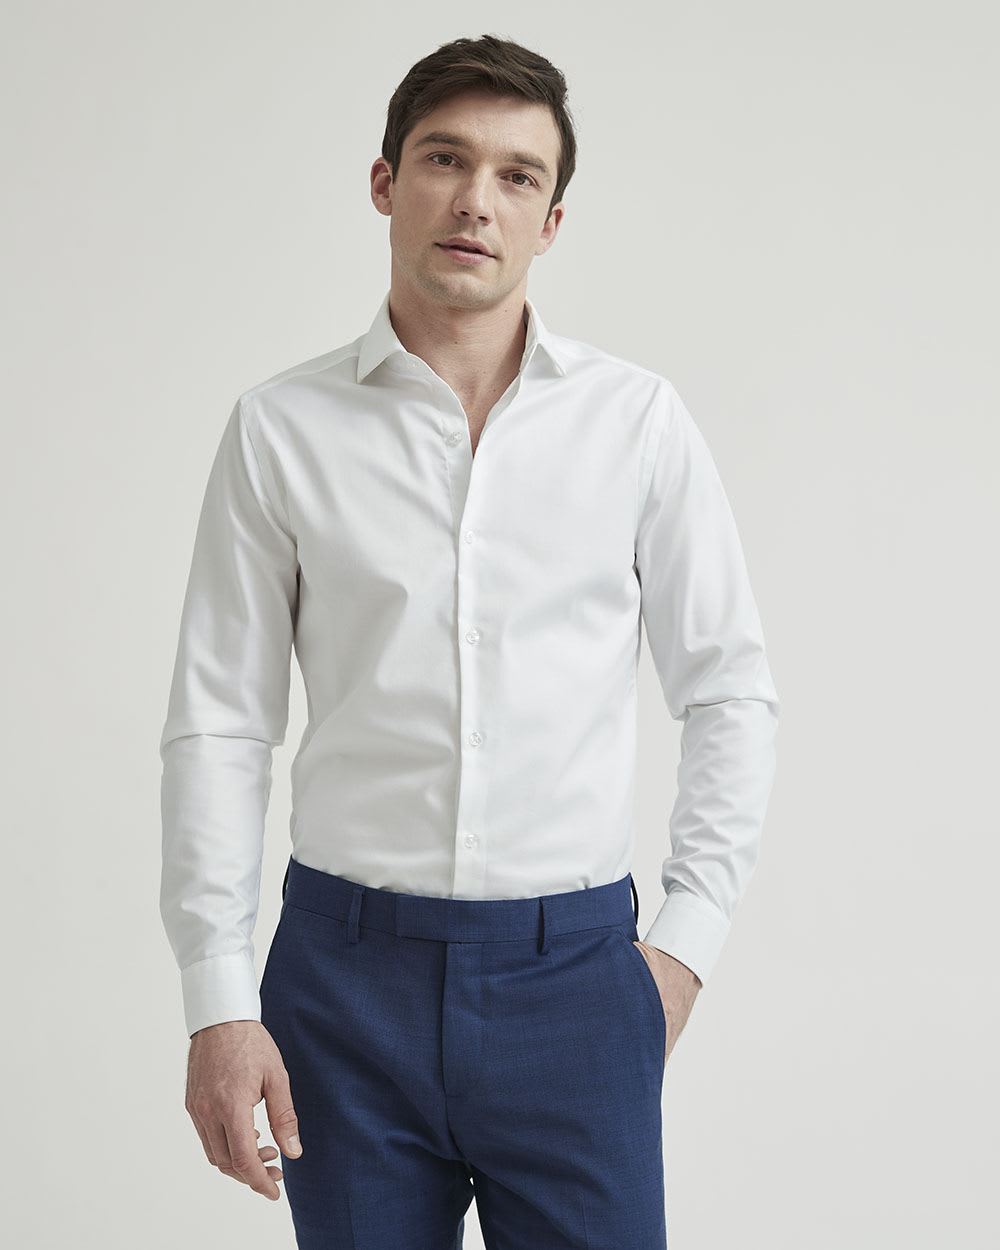 Slim fit dress shirt with wide spread collar